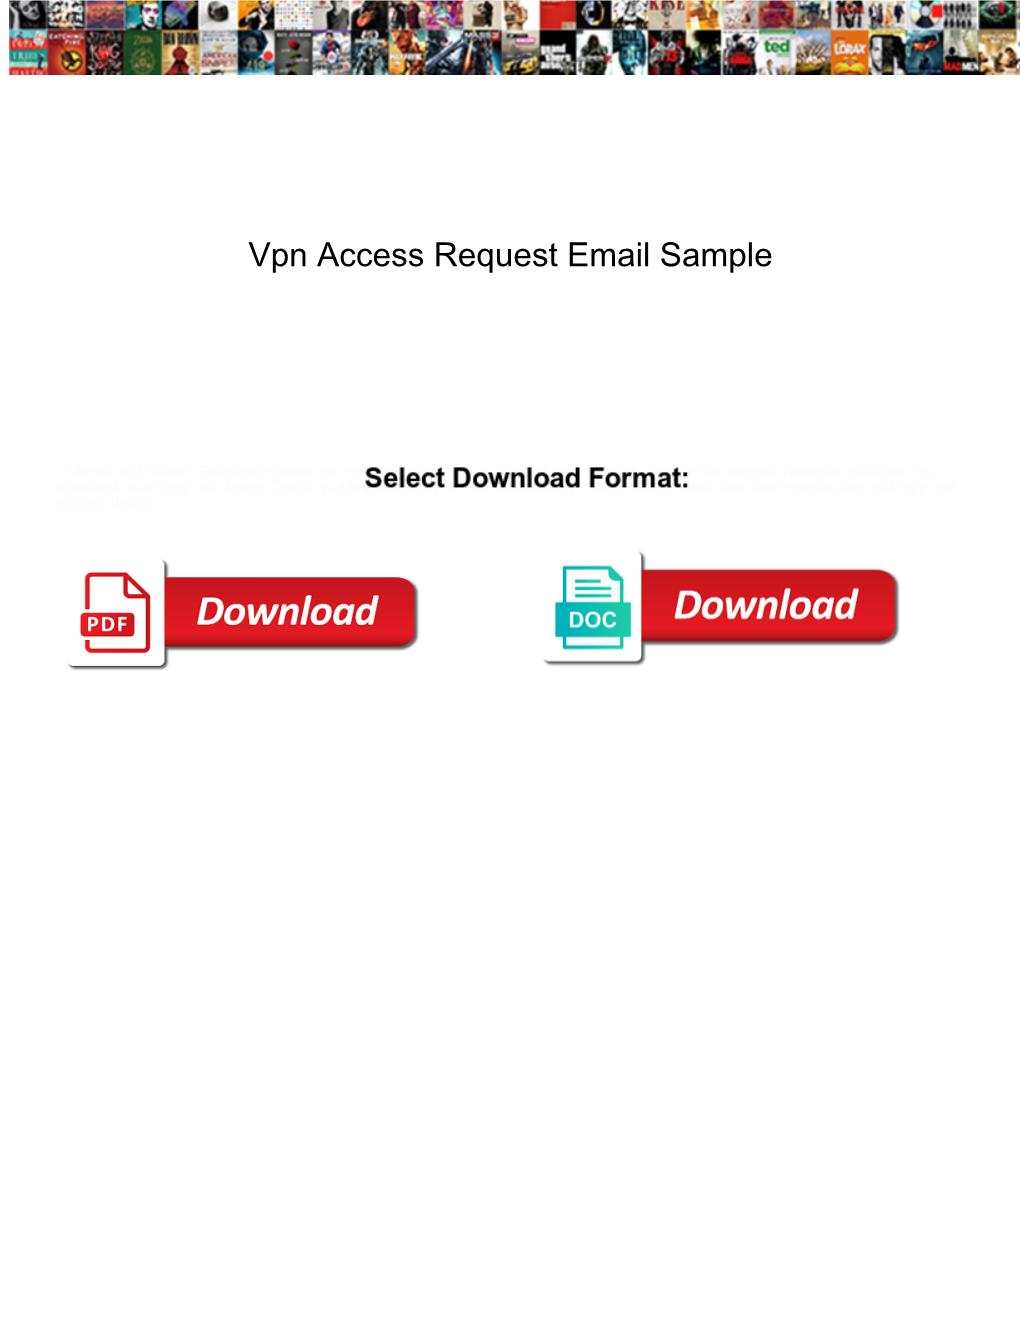 Vpn Access Request Email Sample